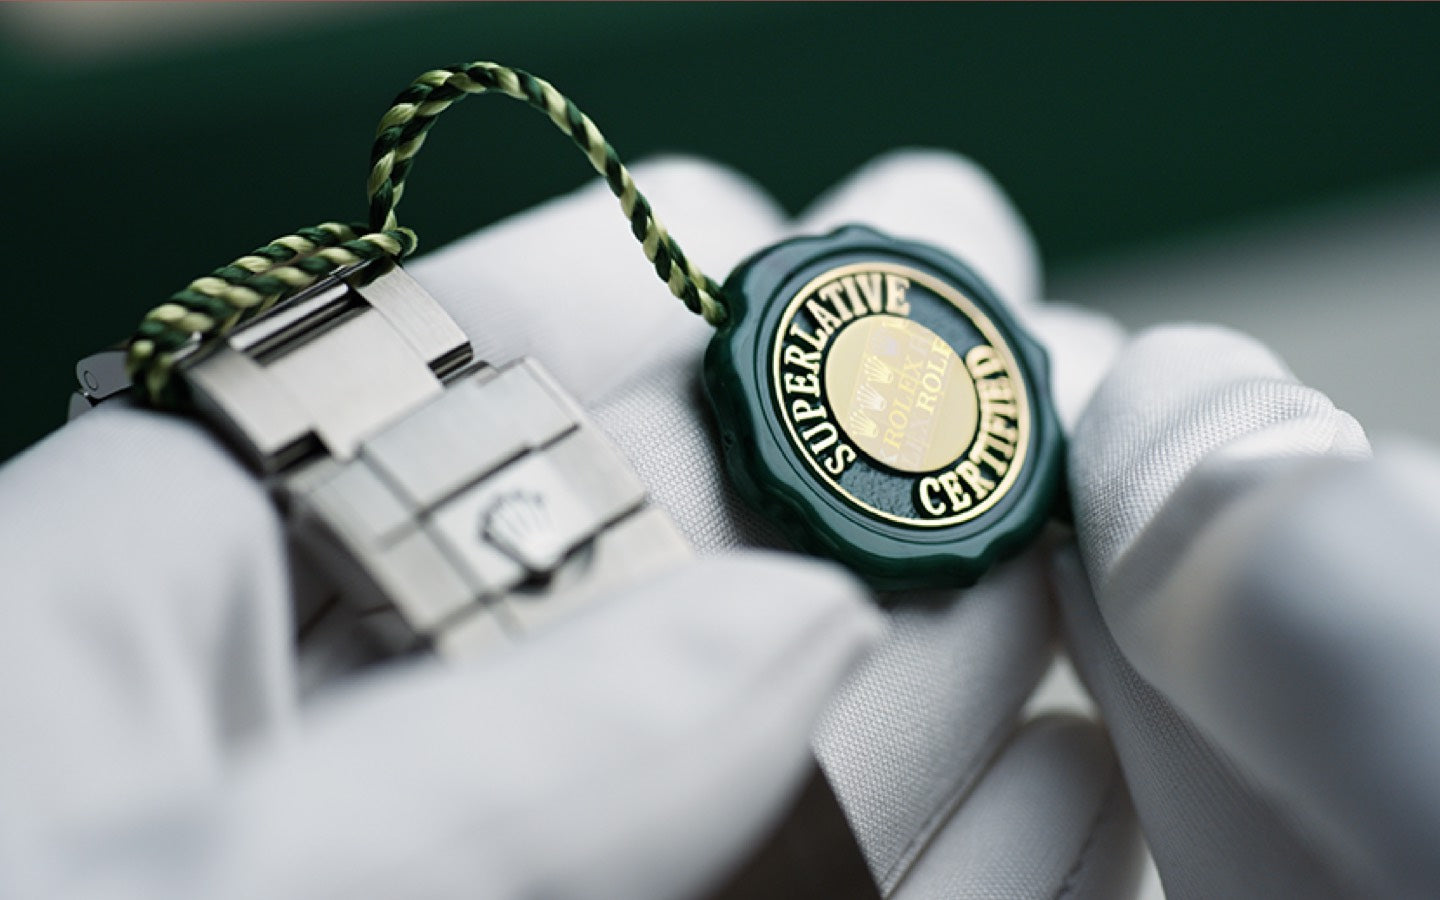 rolex watchmaking more than a certification a state of mind image